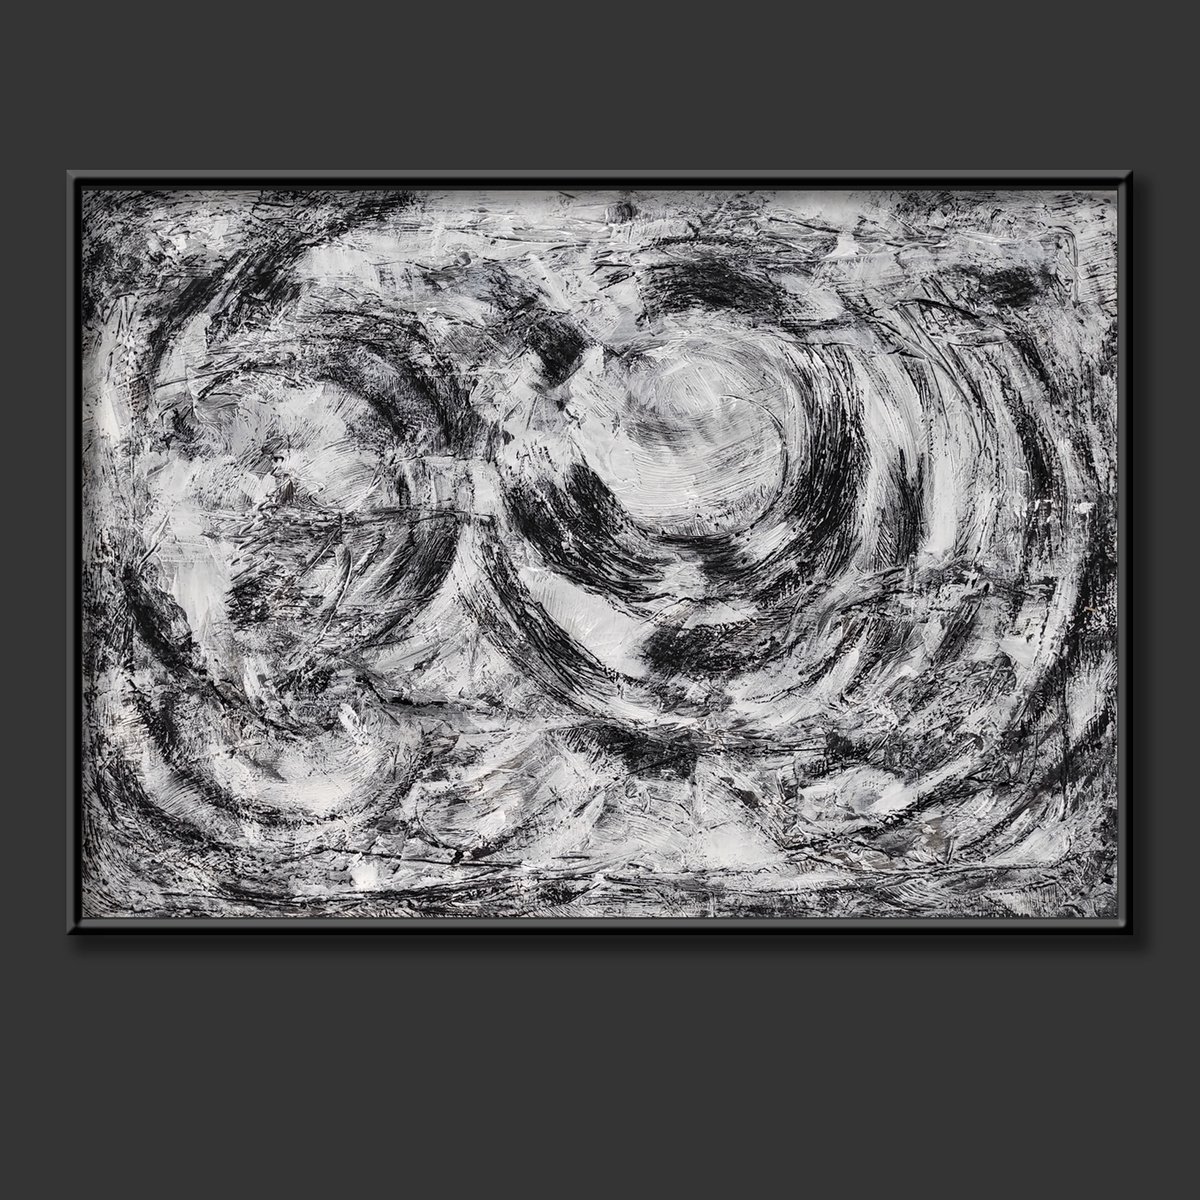 Black and white textured abstraction Black helix by Maria Svetlakova